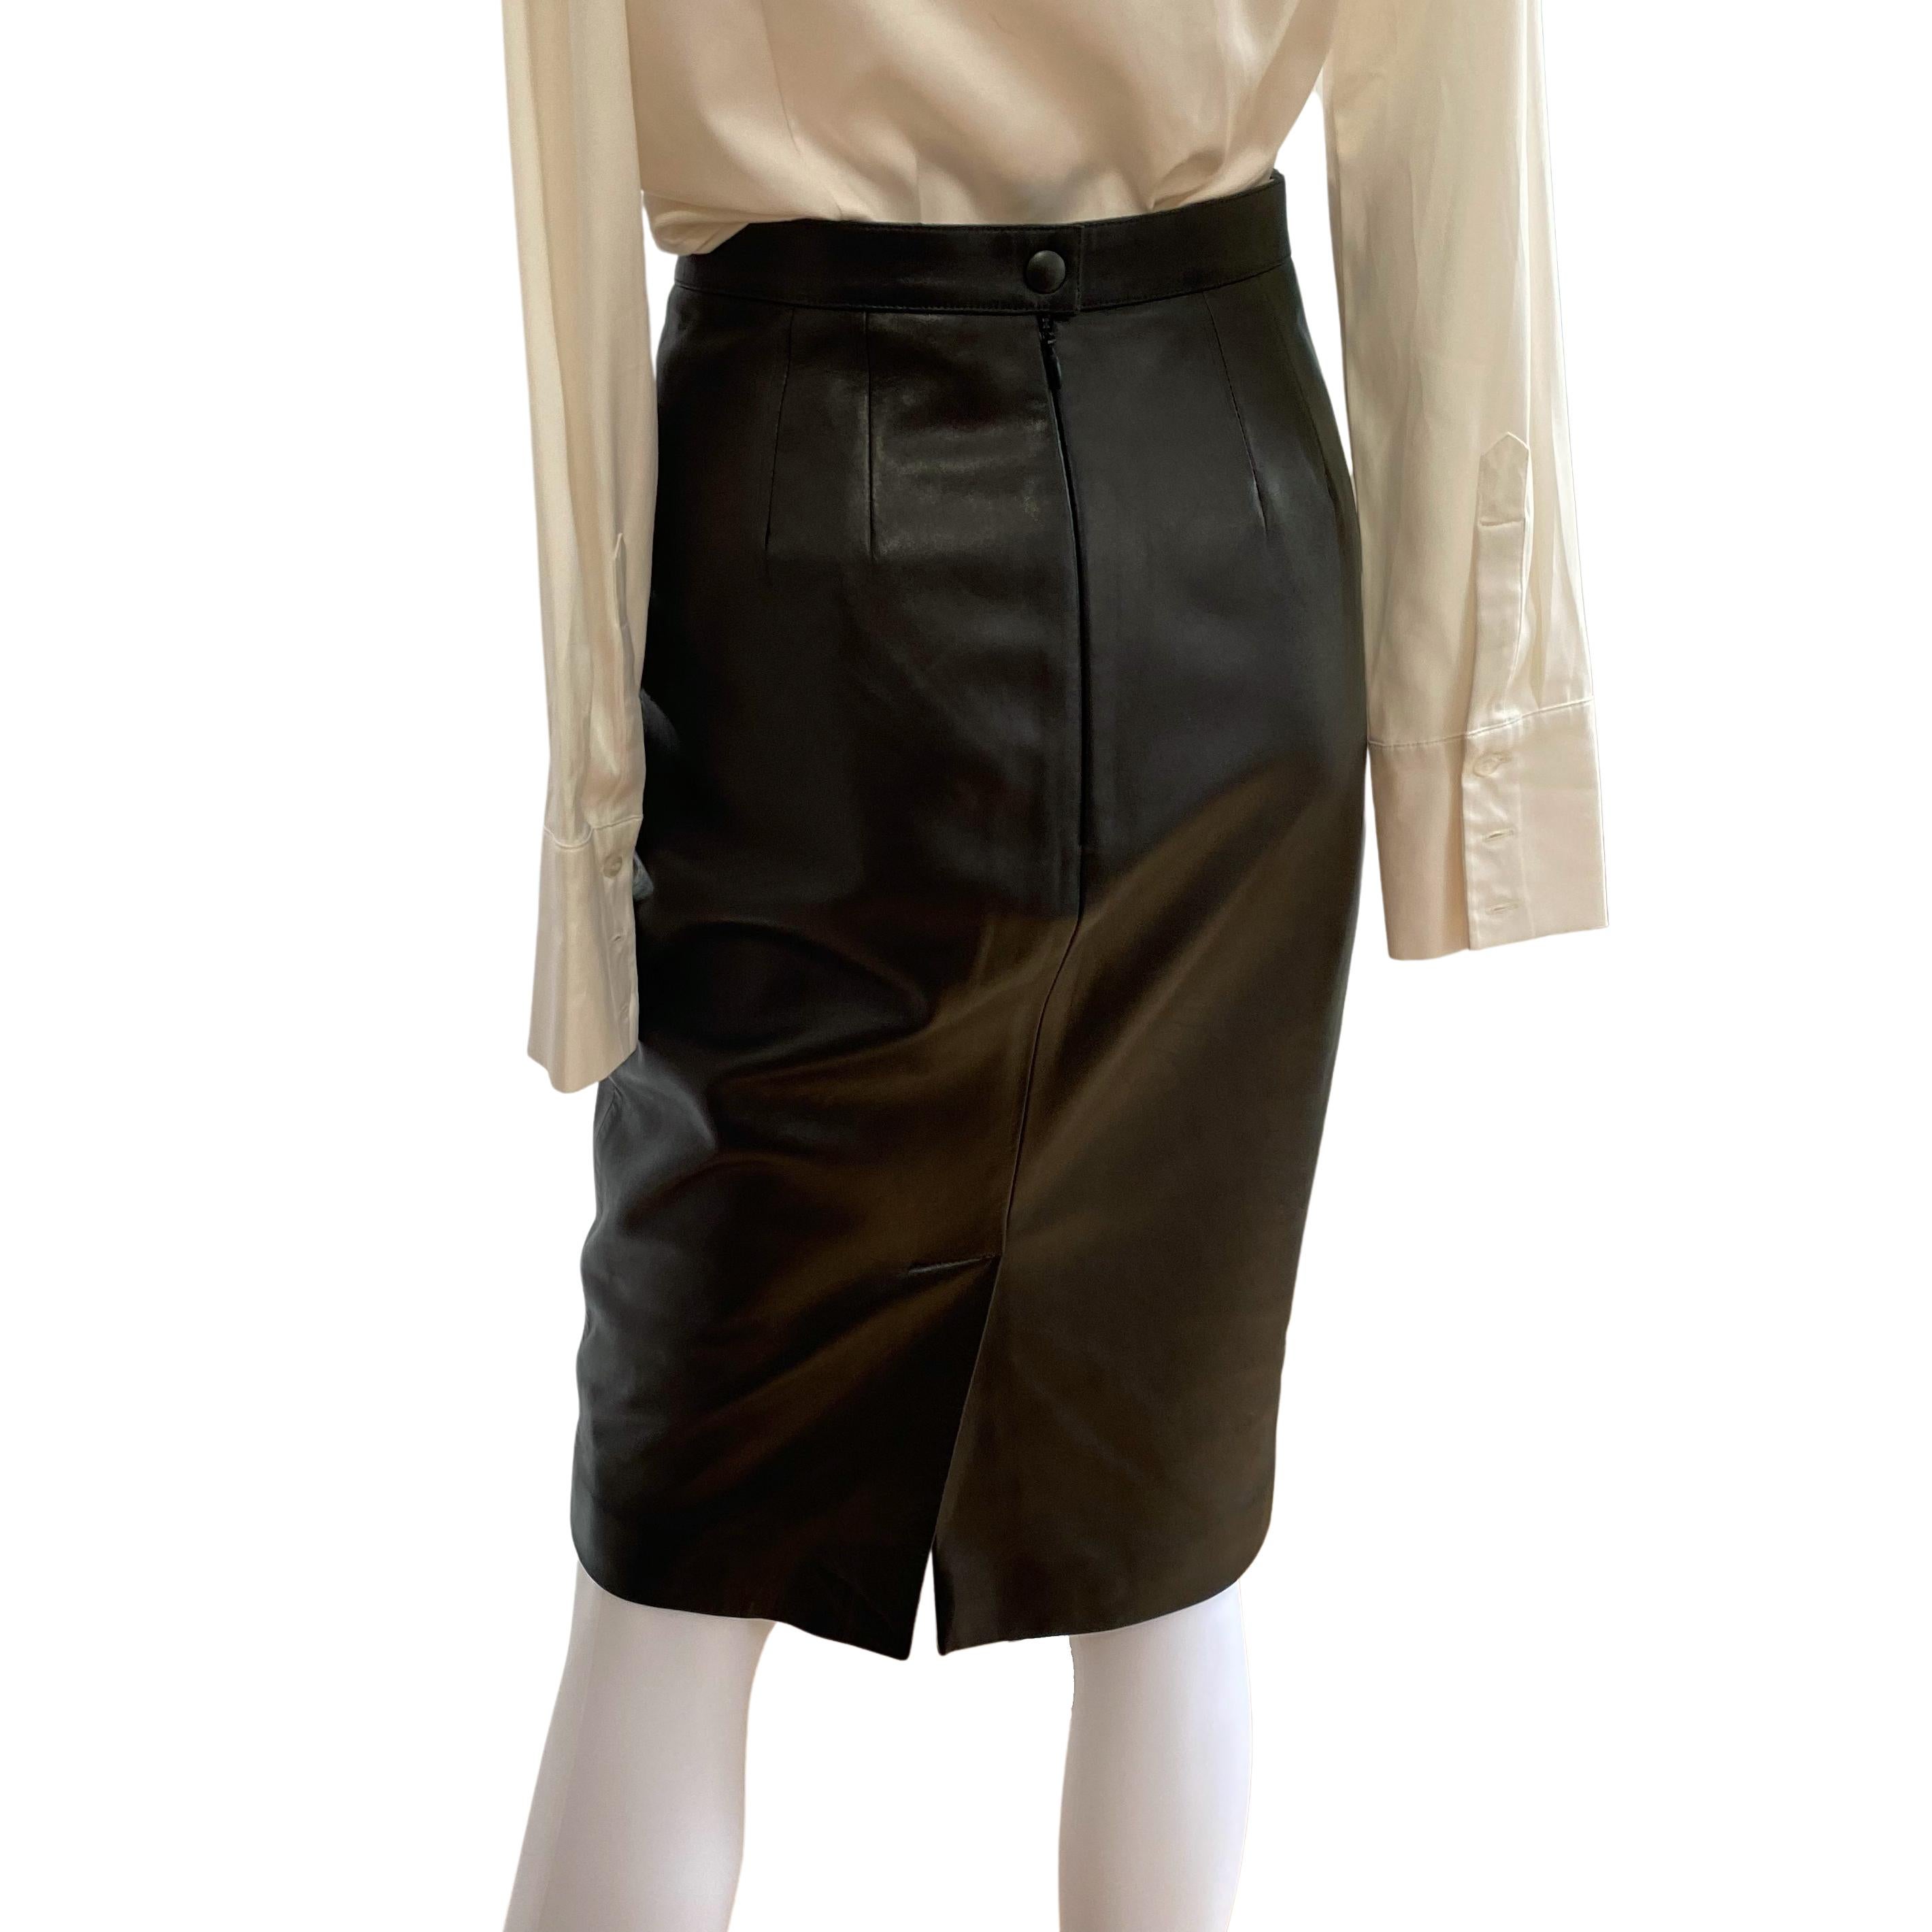 AGNÈS B. Made in France Lambskin Black Leather Skirt with Pockets In Excellent Condition For Sale In Boston, MA